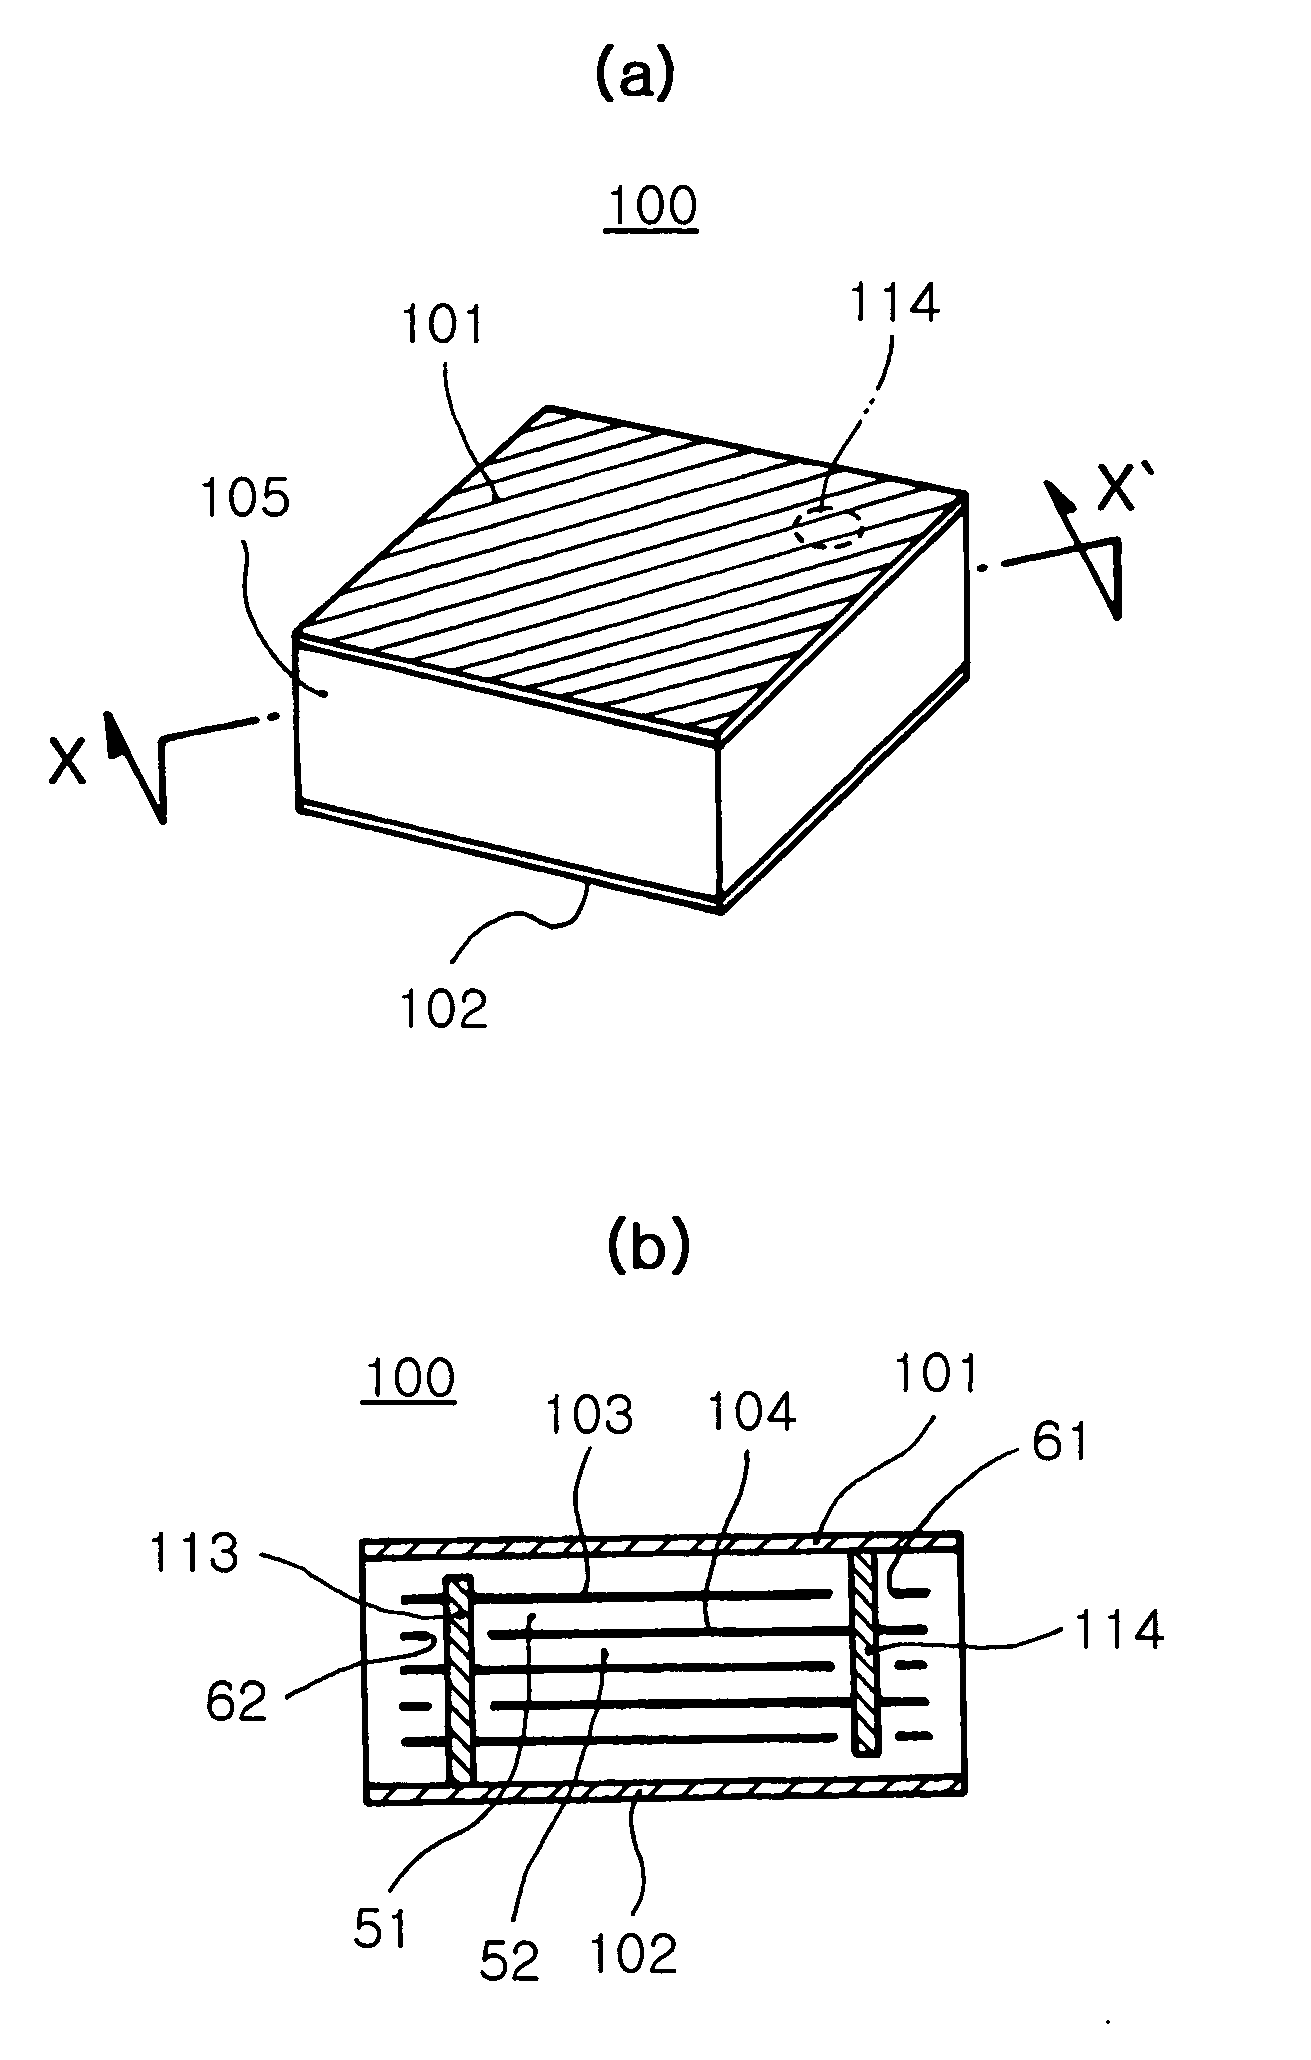 Embedded multilayer chip capacitor and printed circuit board having the same